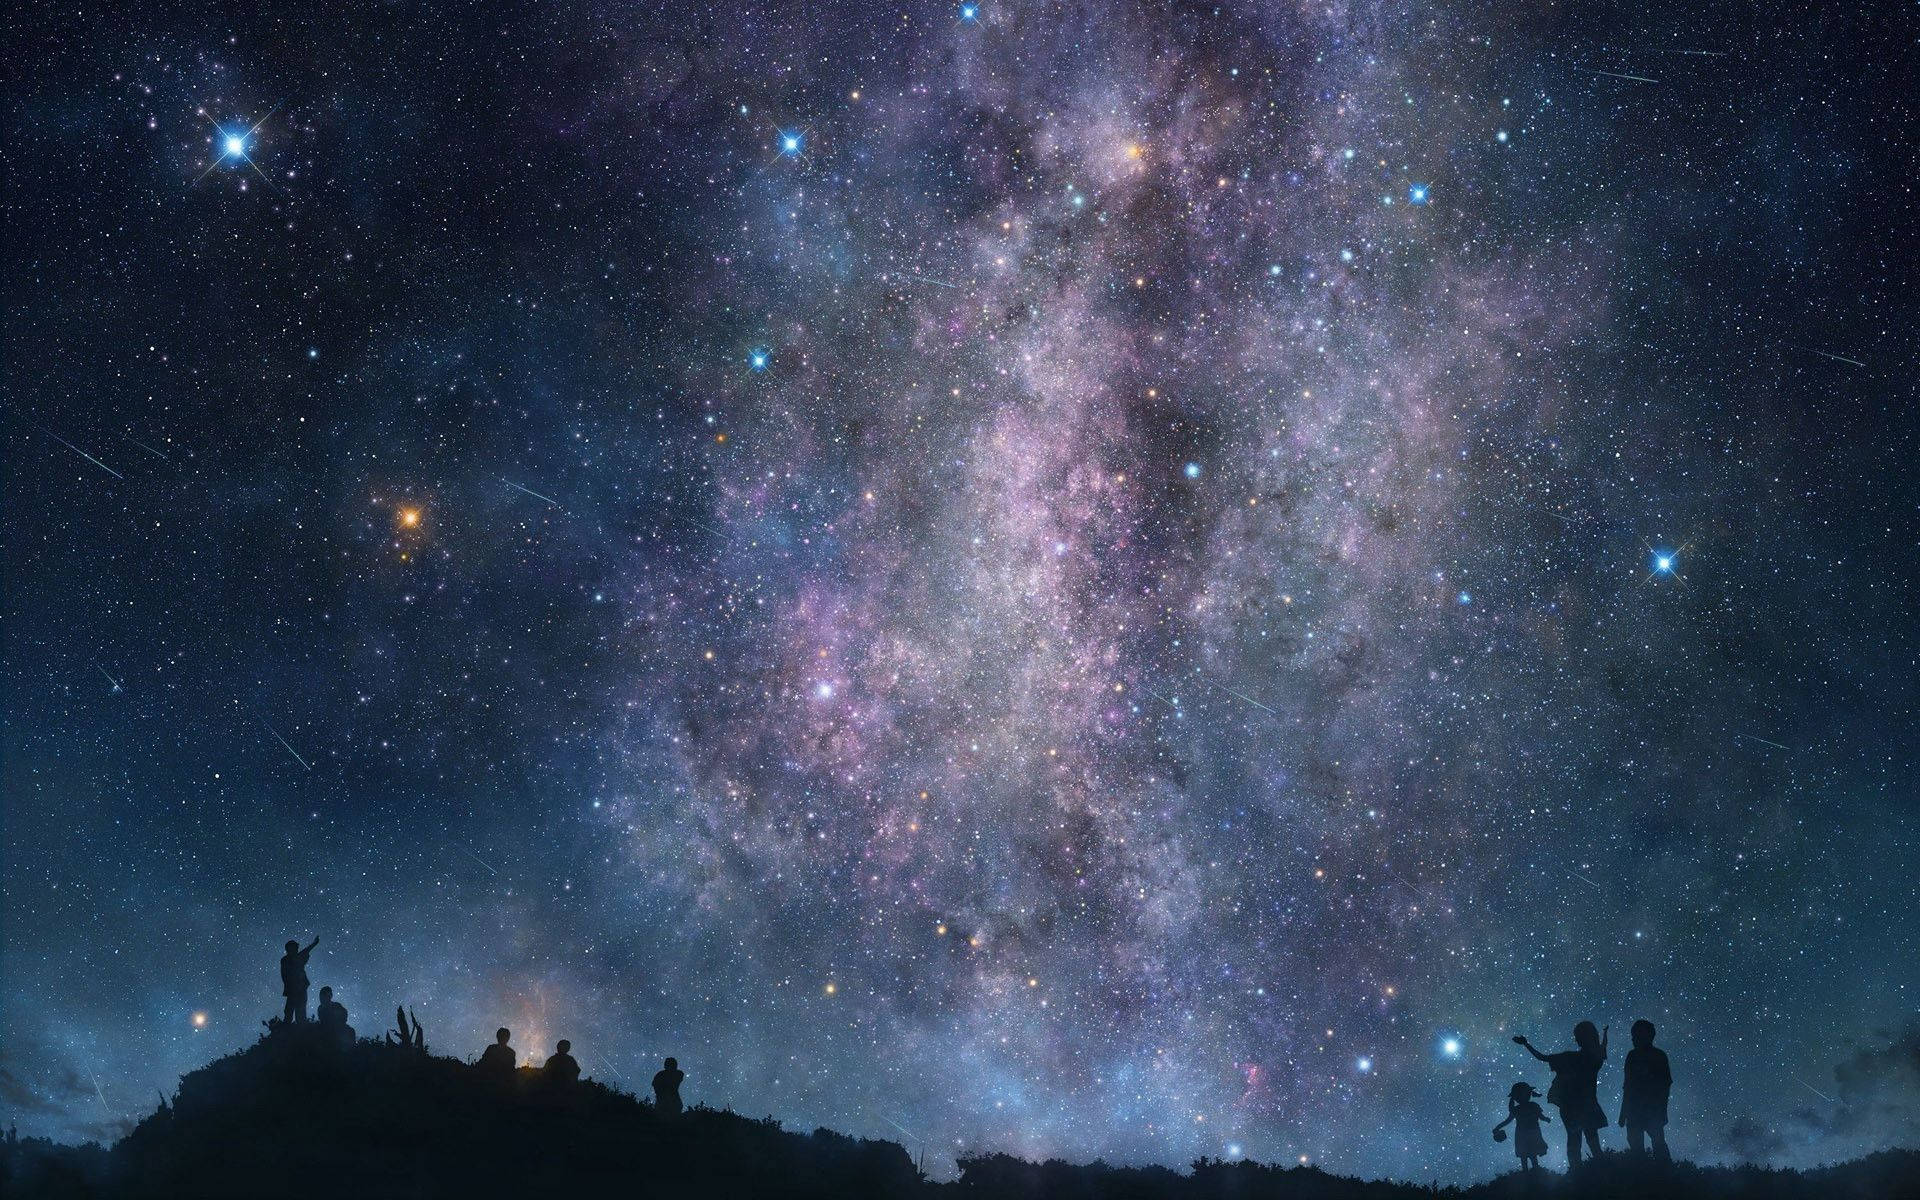 “A Sky Filled with Stars - A Sight that Takes Our Breath Away” Wallpaper